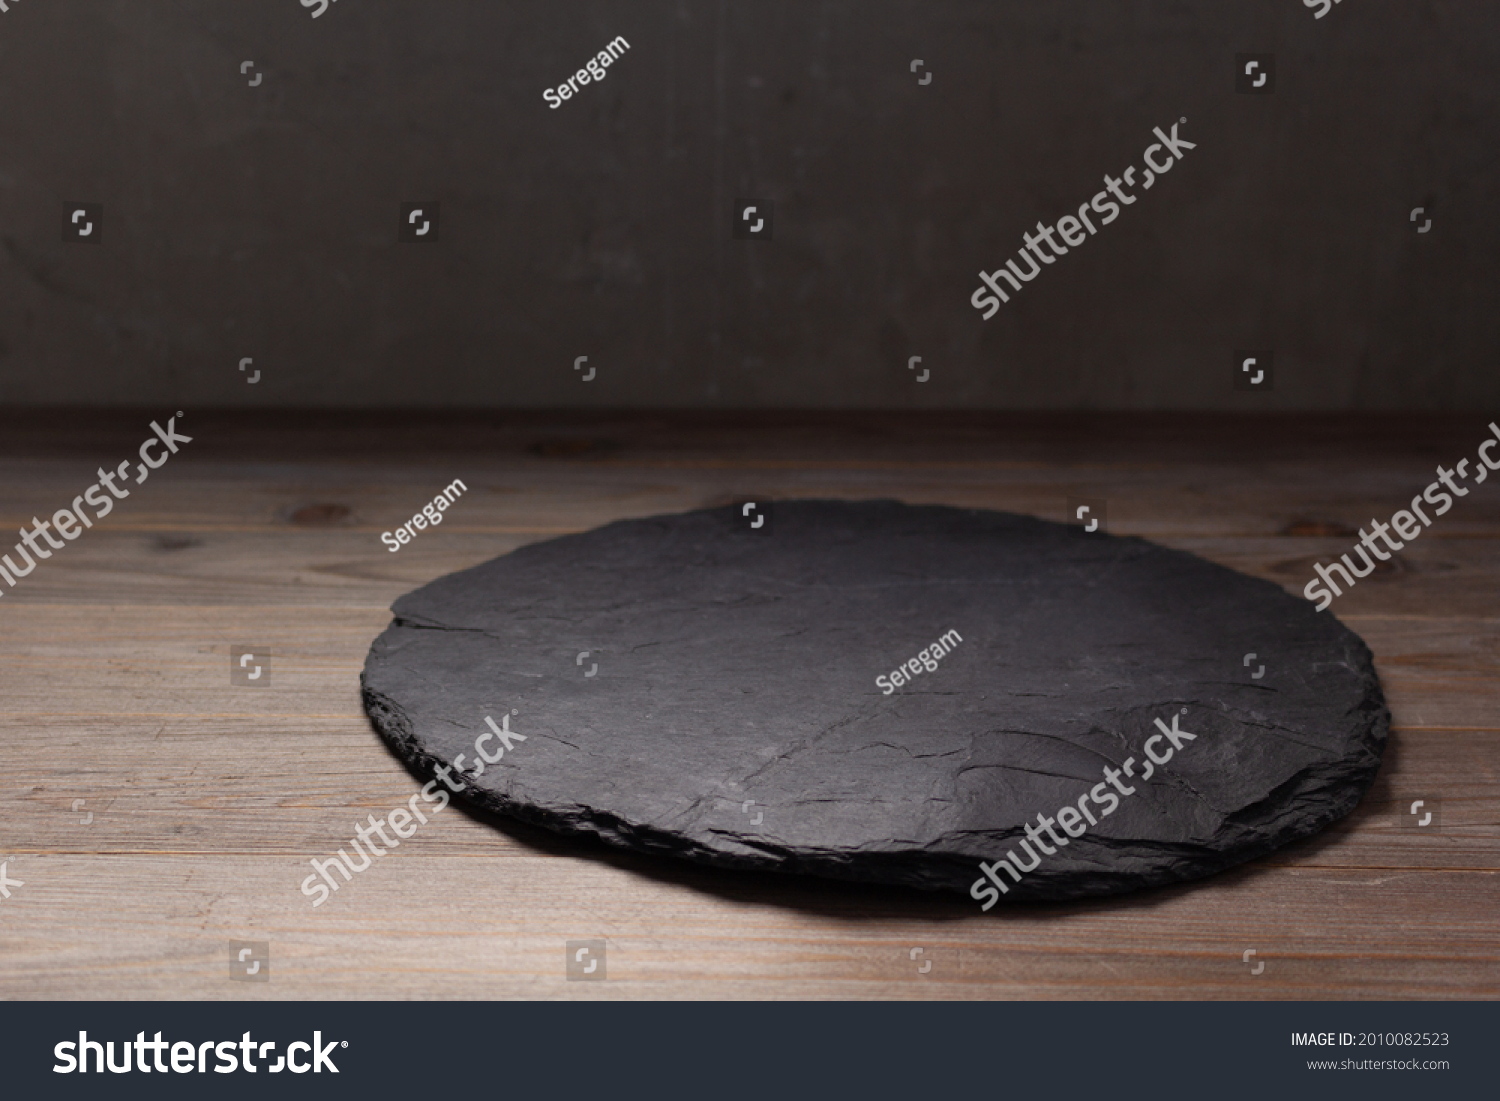 Slate pizza cutting board for homemade bread cooking or baking on table. Empty pizza board at wooden tabletop background. Bakery concept in kitchen #2010082523